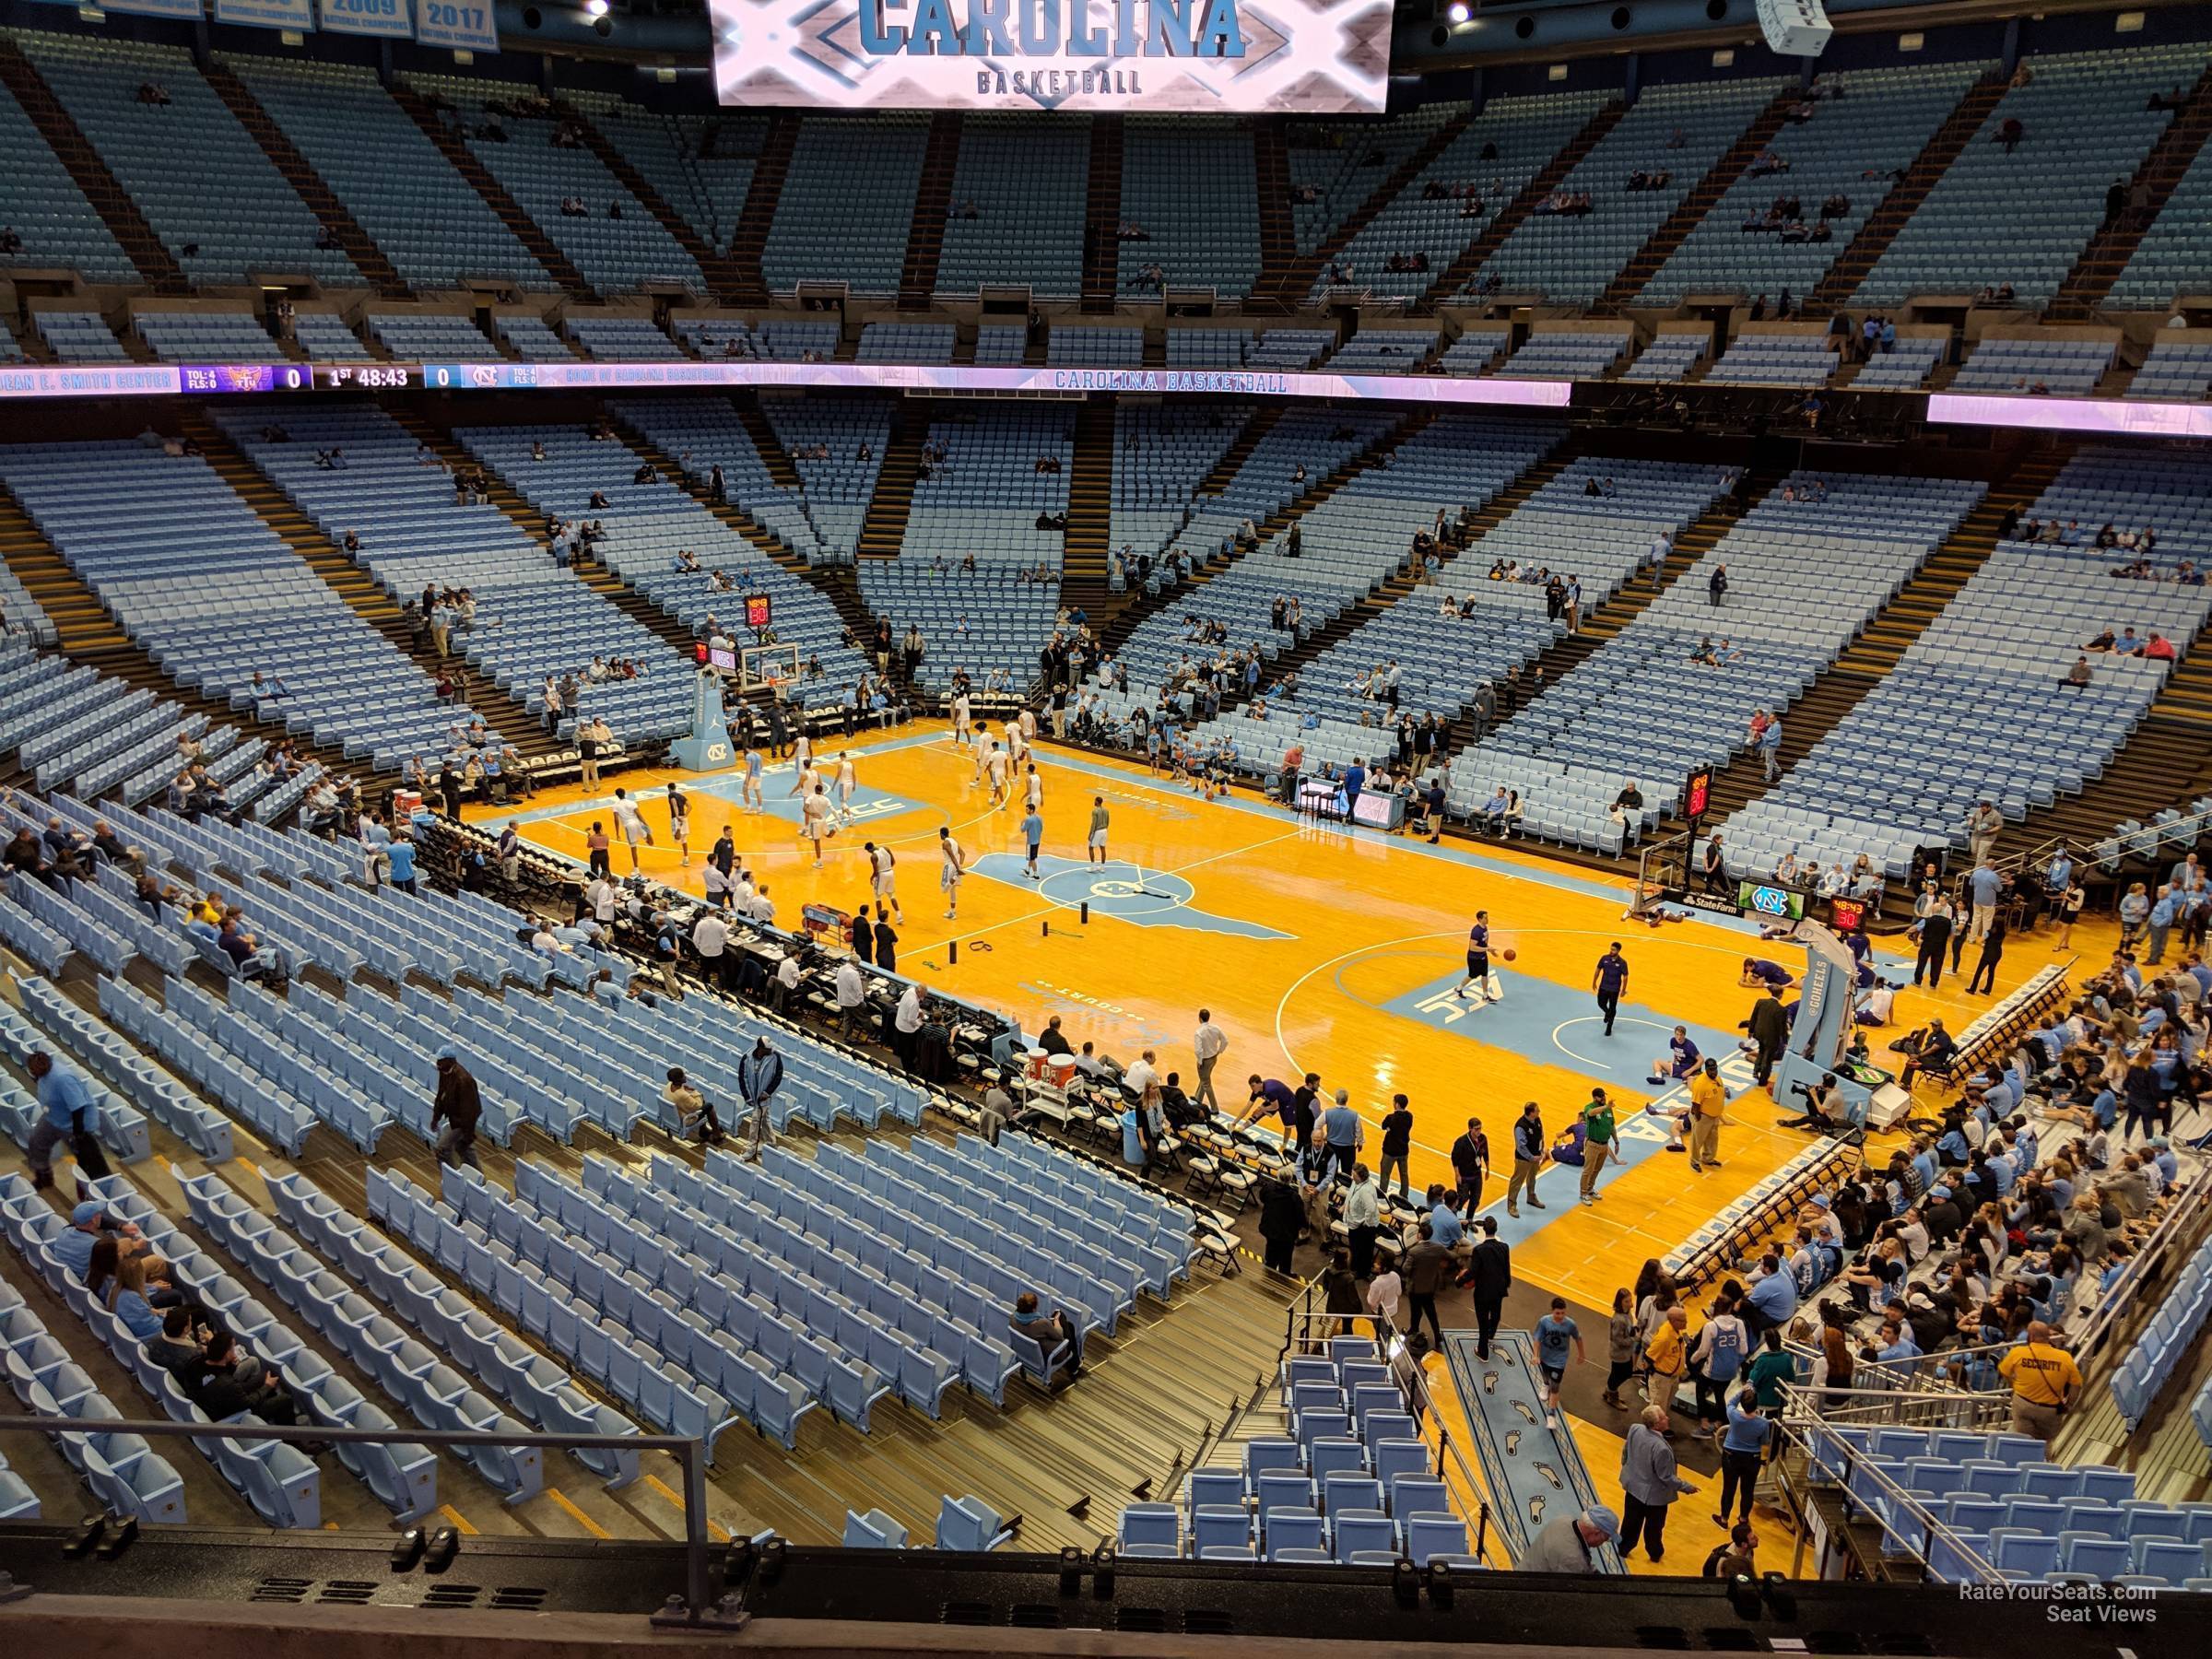 section 212, row c seat view  - dean smith center